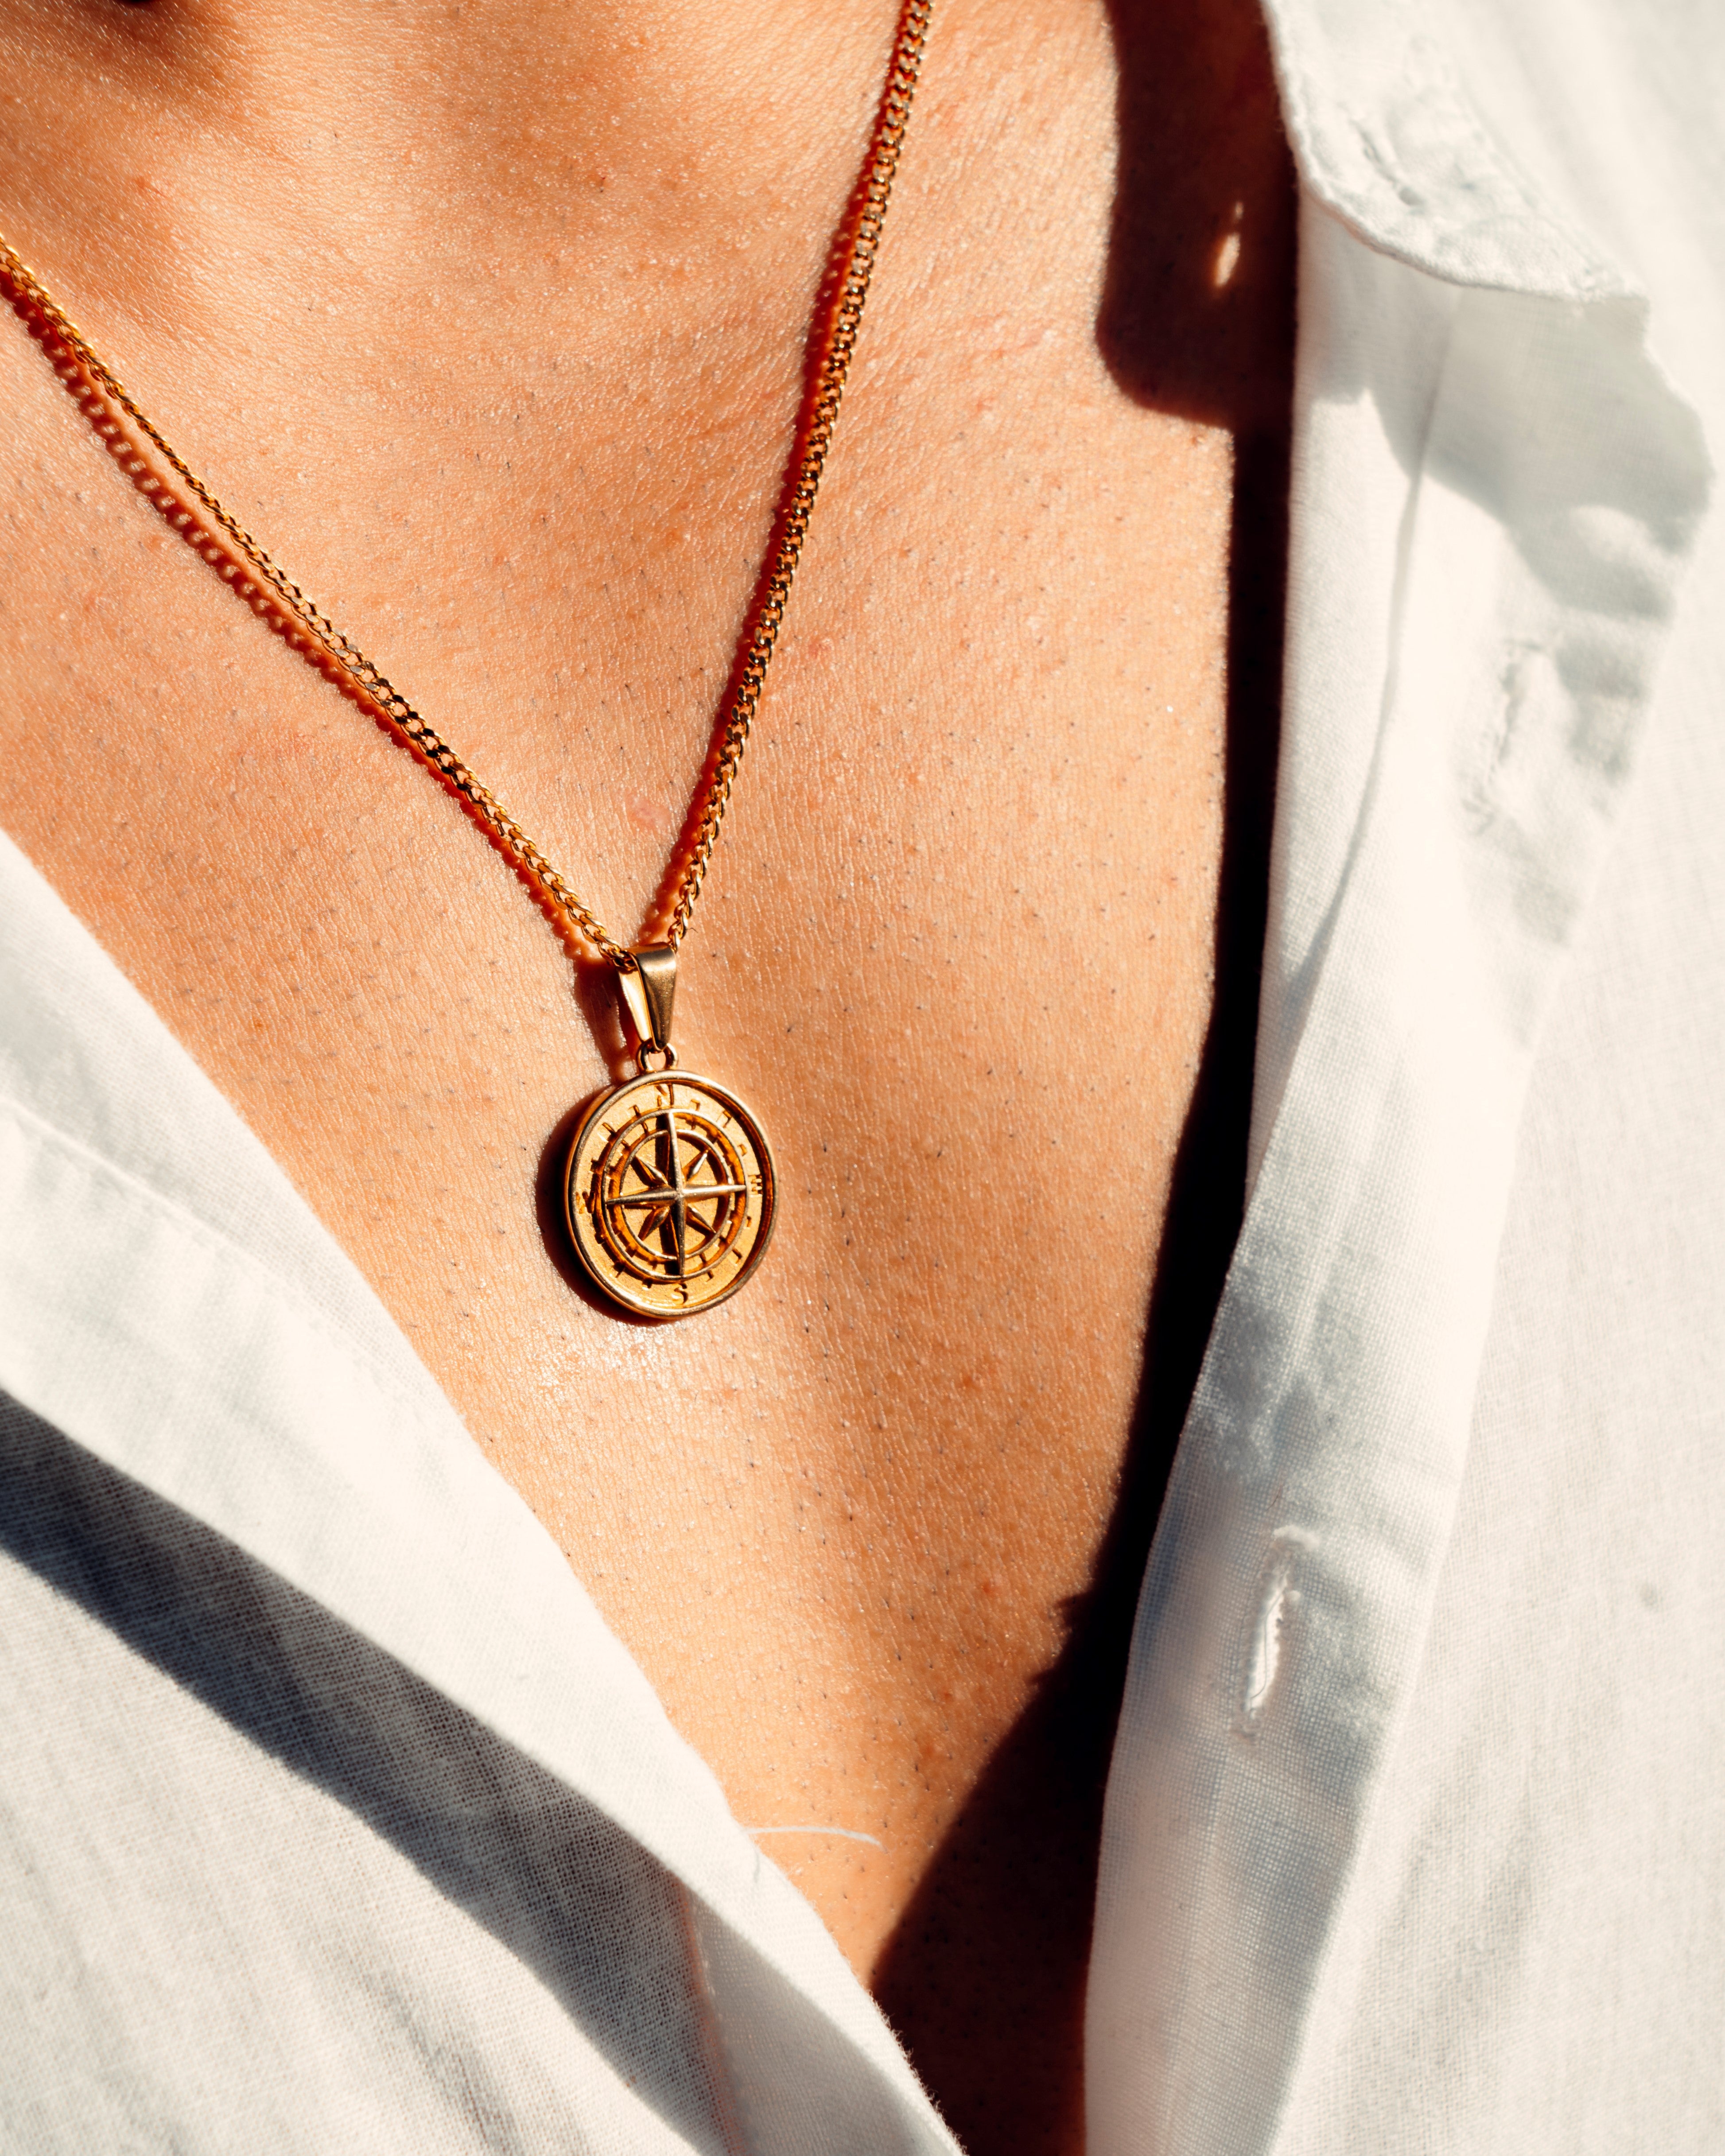 Mini disc necklace with engraved compass in solid gold: 10K, 14K or 18K